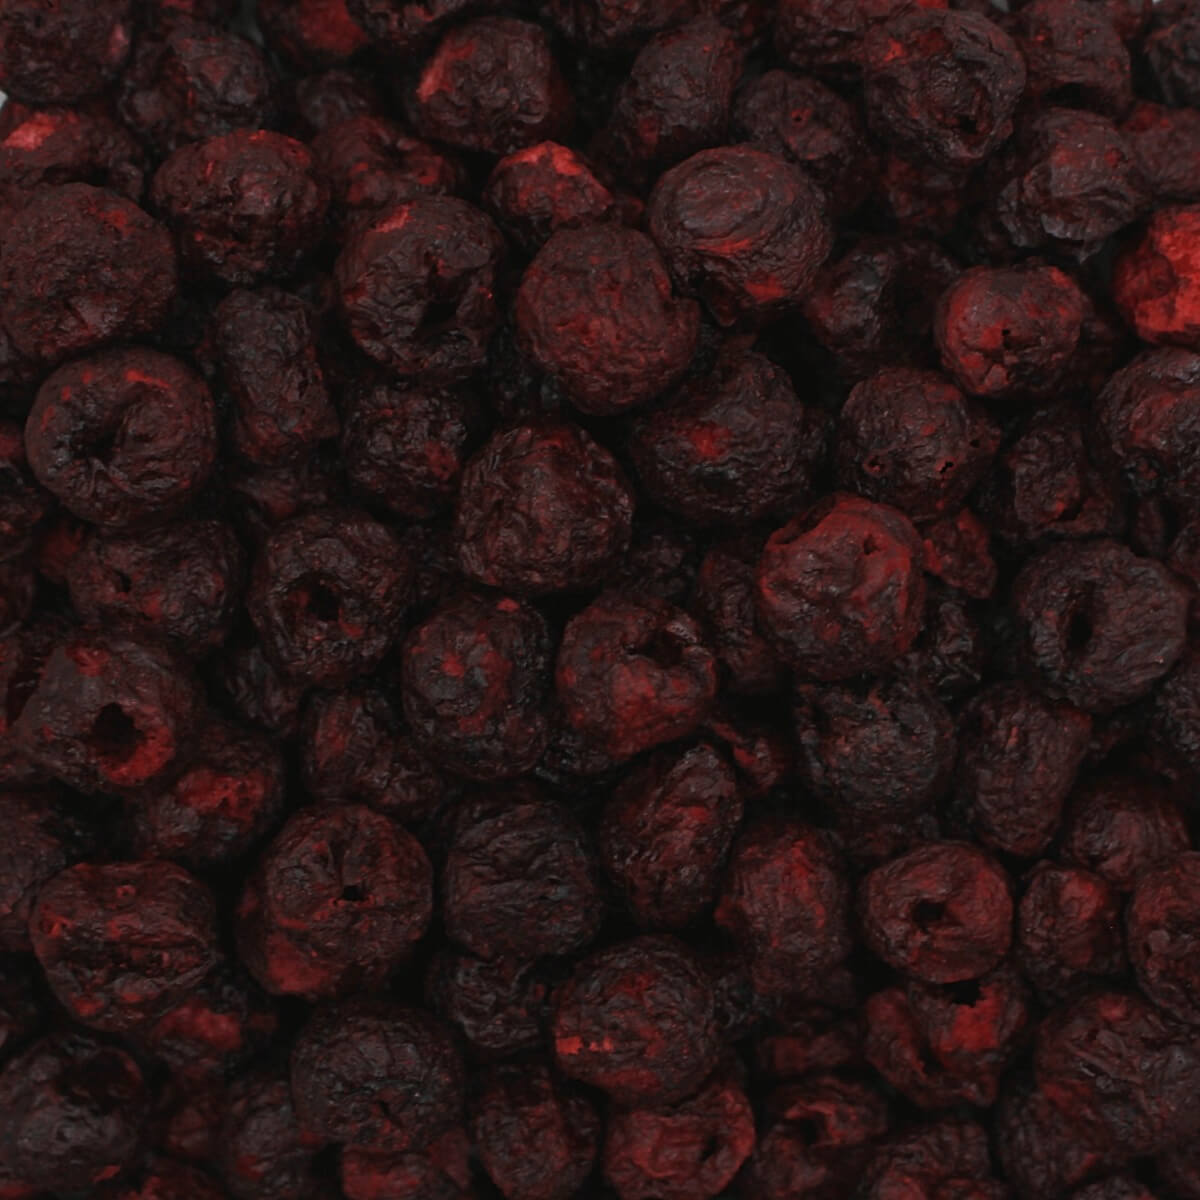 A close up image of red berries.